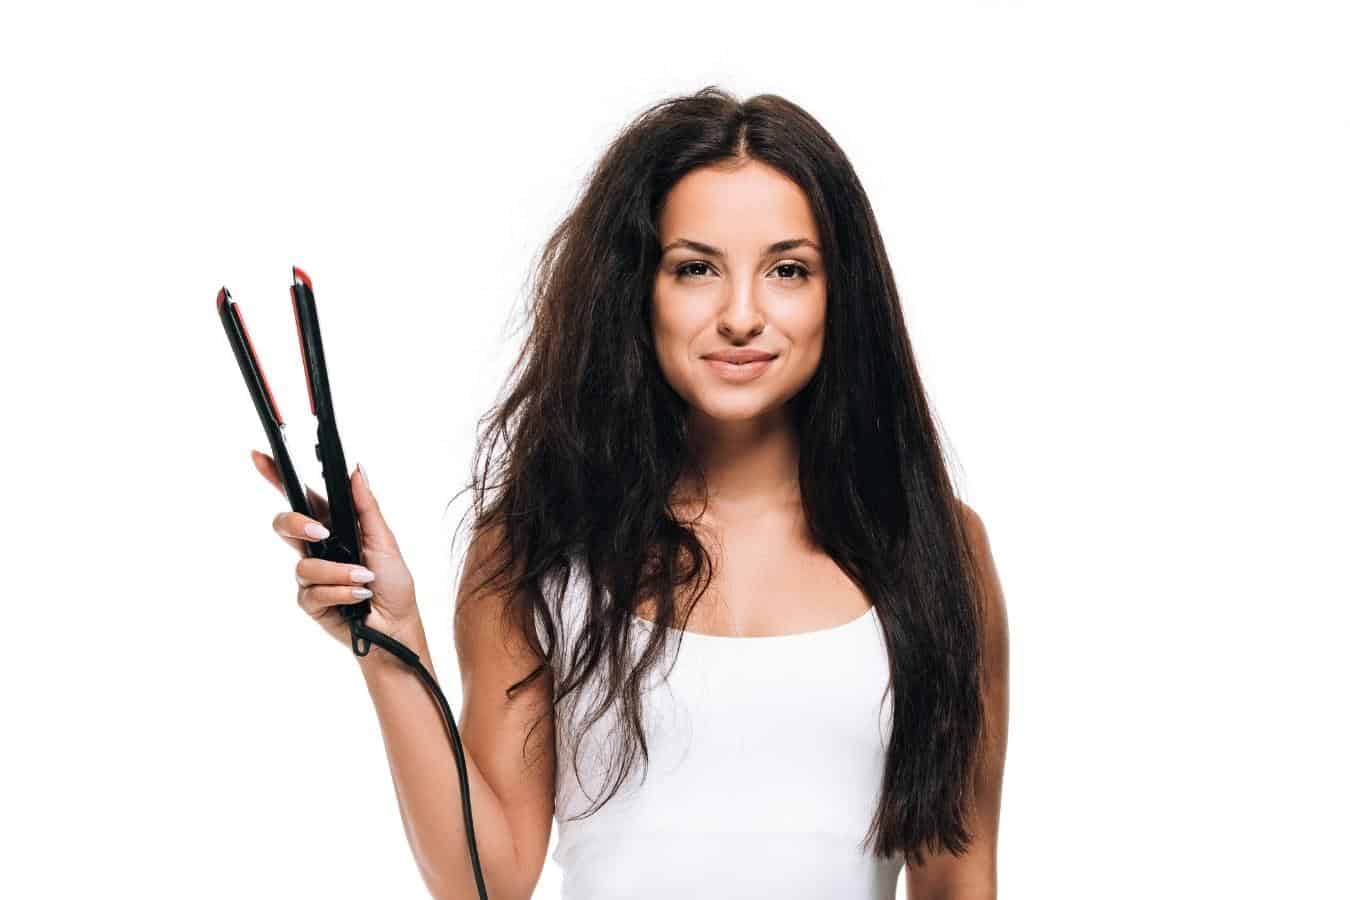 I have frizzy hair and have invented the best way to get it poker straight  and reduce split ends - it's so easy too | The Irish Sun